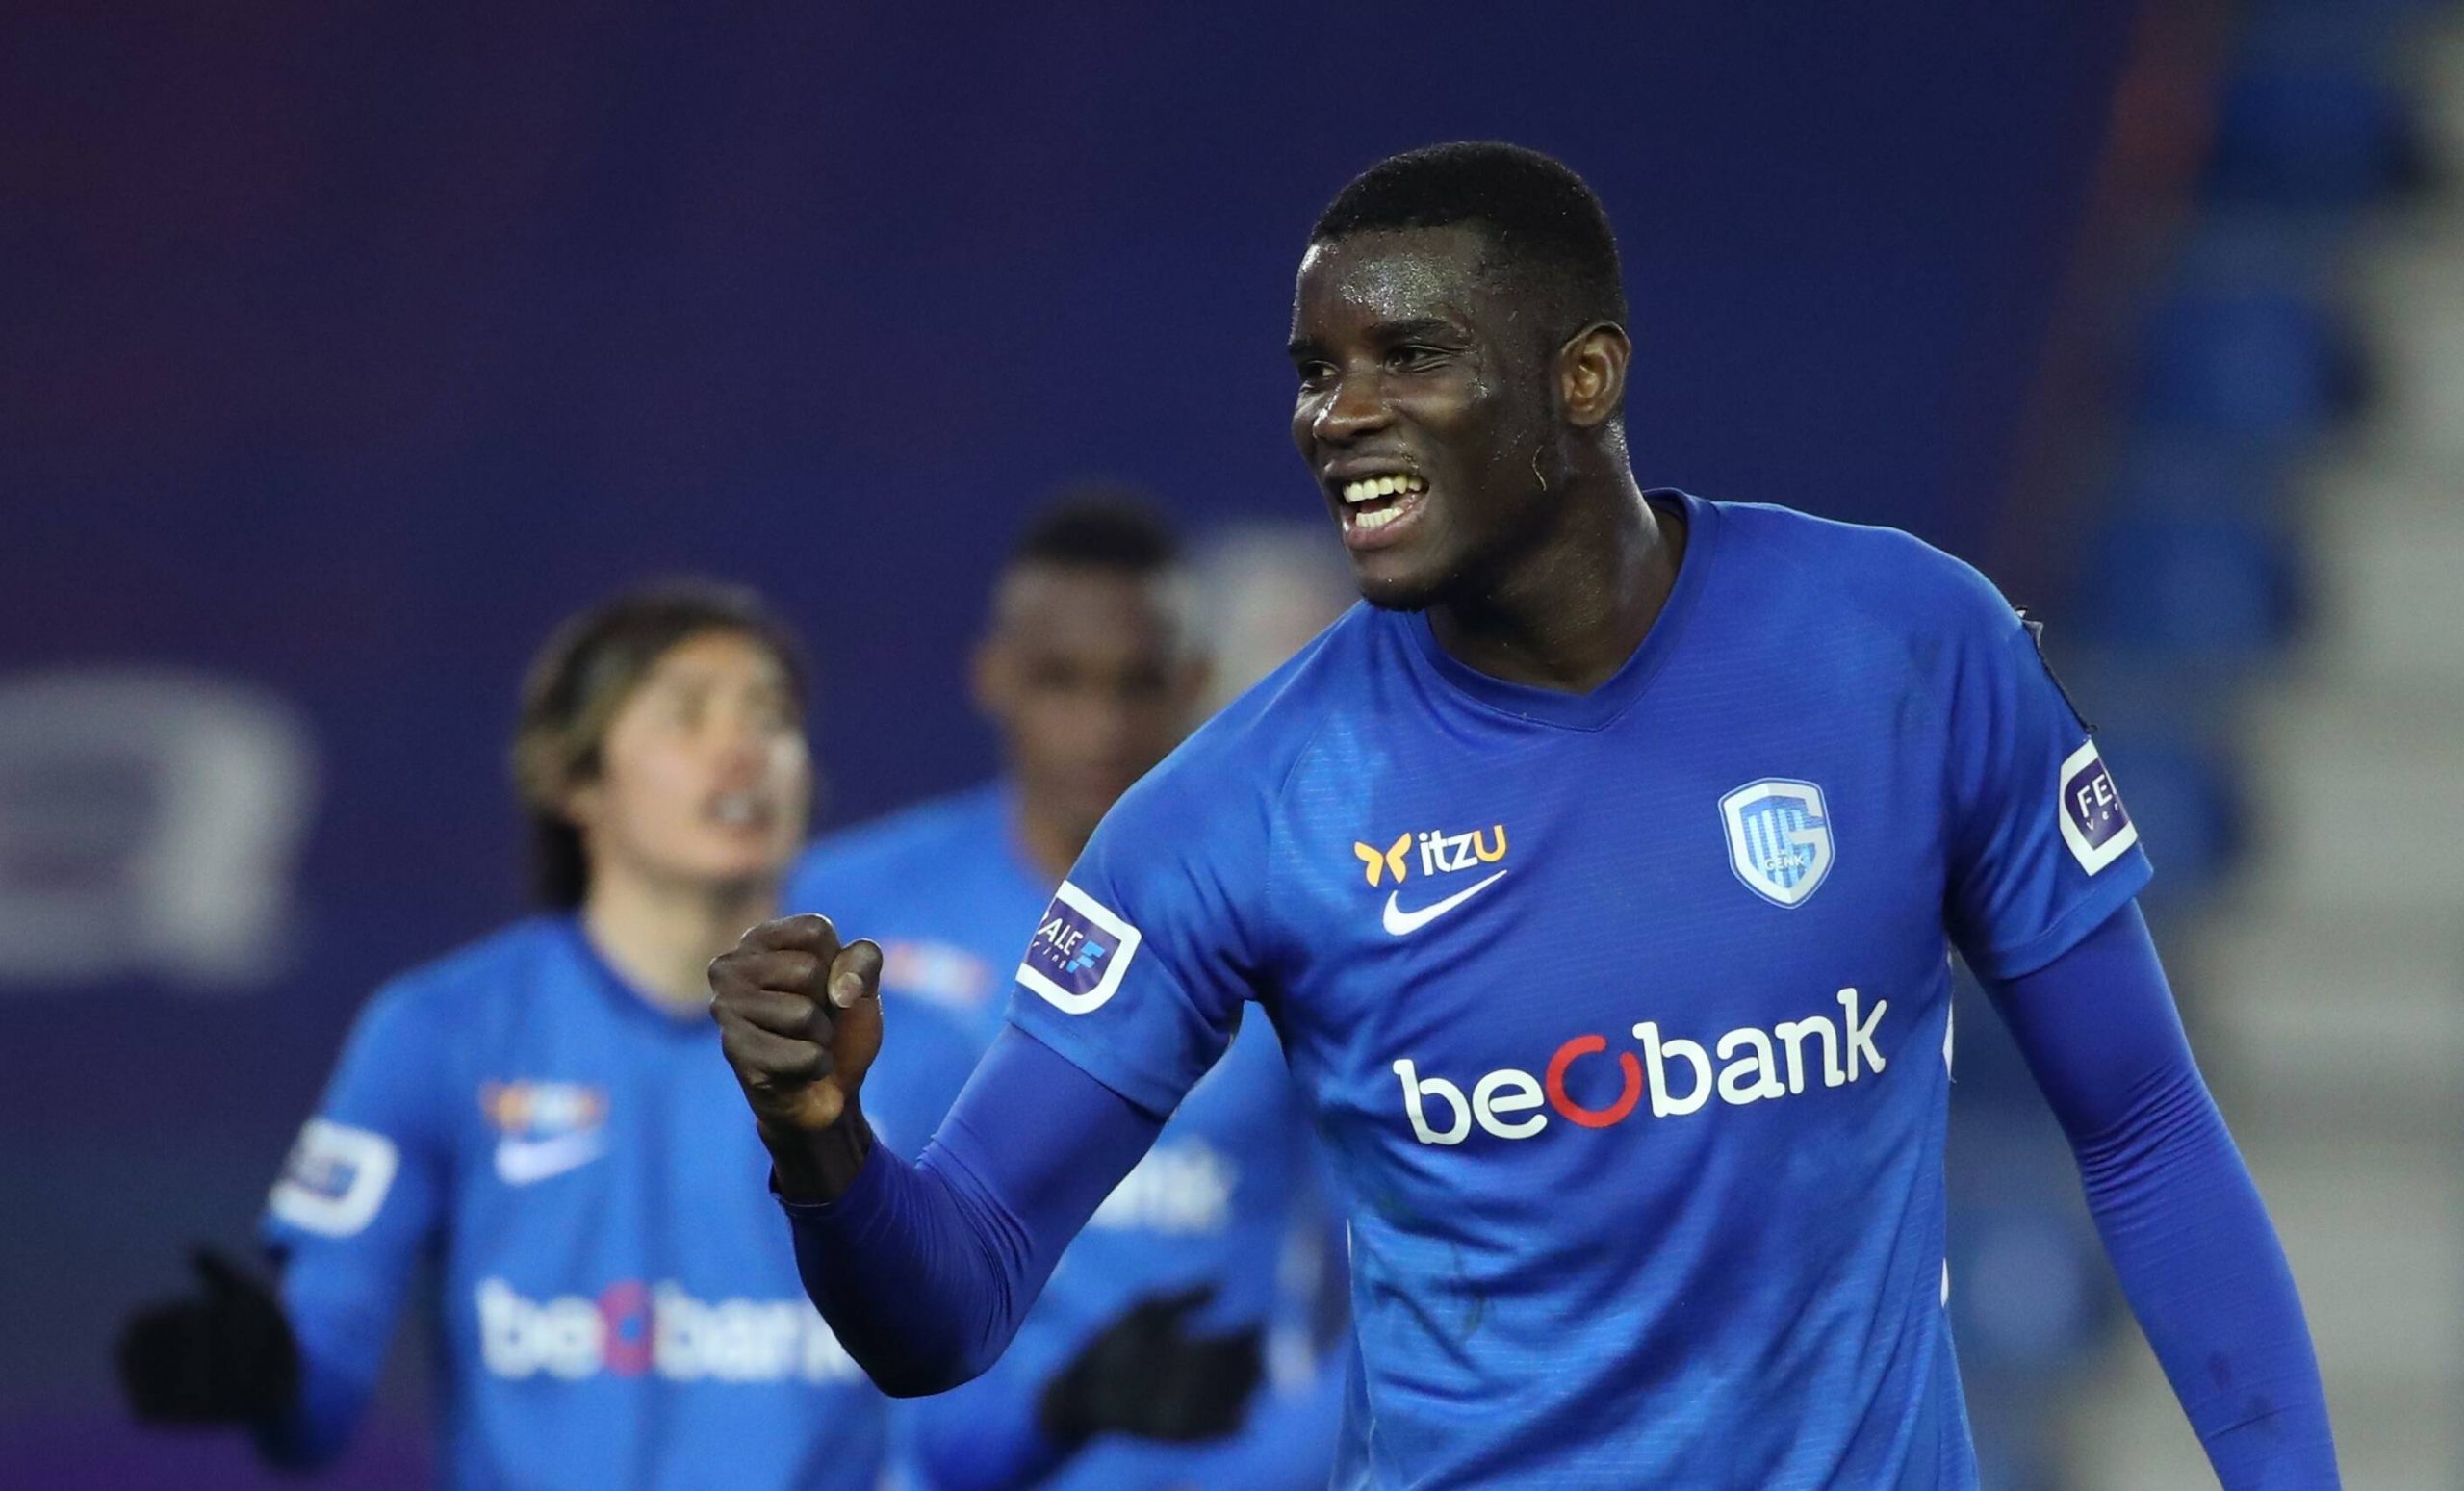 Paul Onuachu of Genk is linked with a transfer to West Ham United and Brighton.